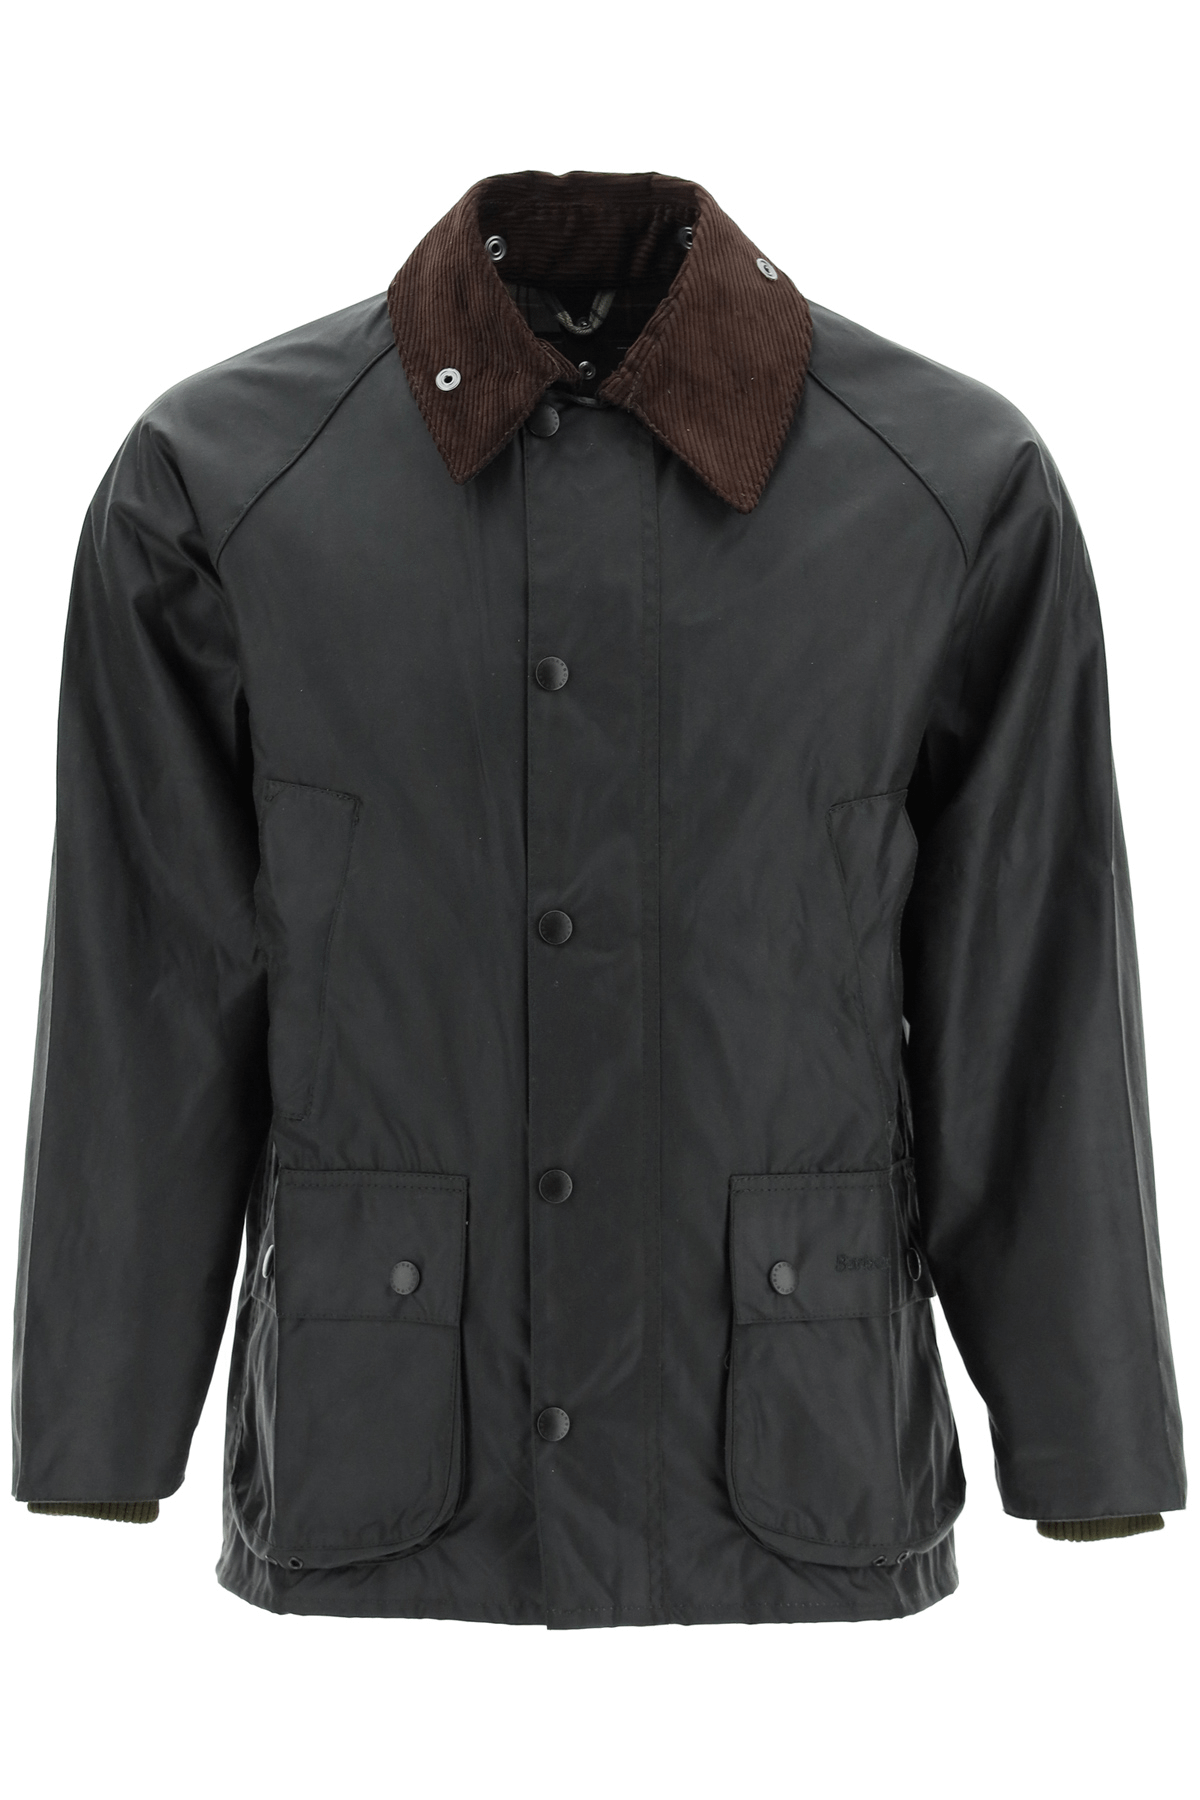 Barbour BARBOUR bedale waxed jacket